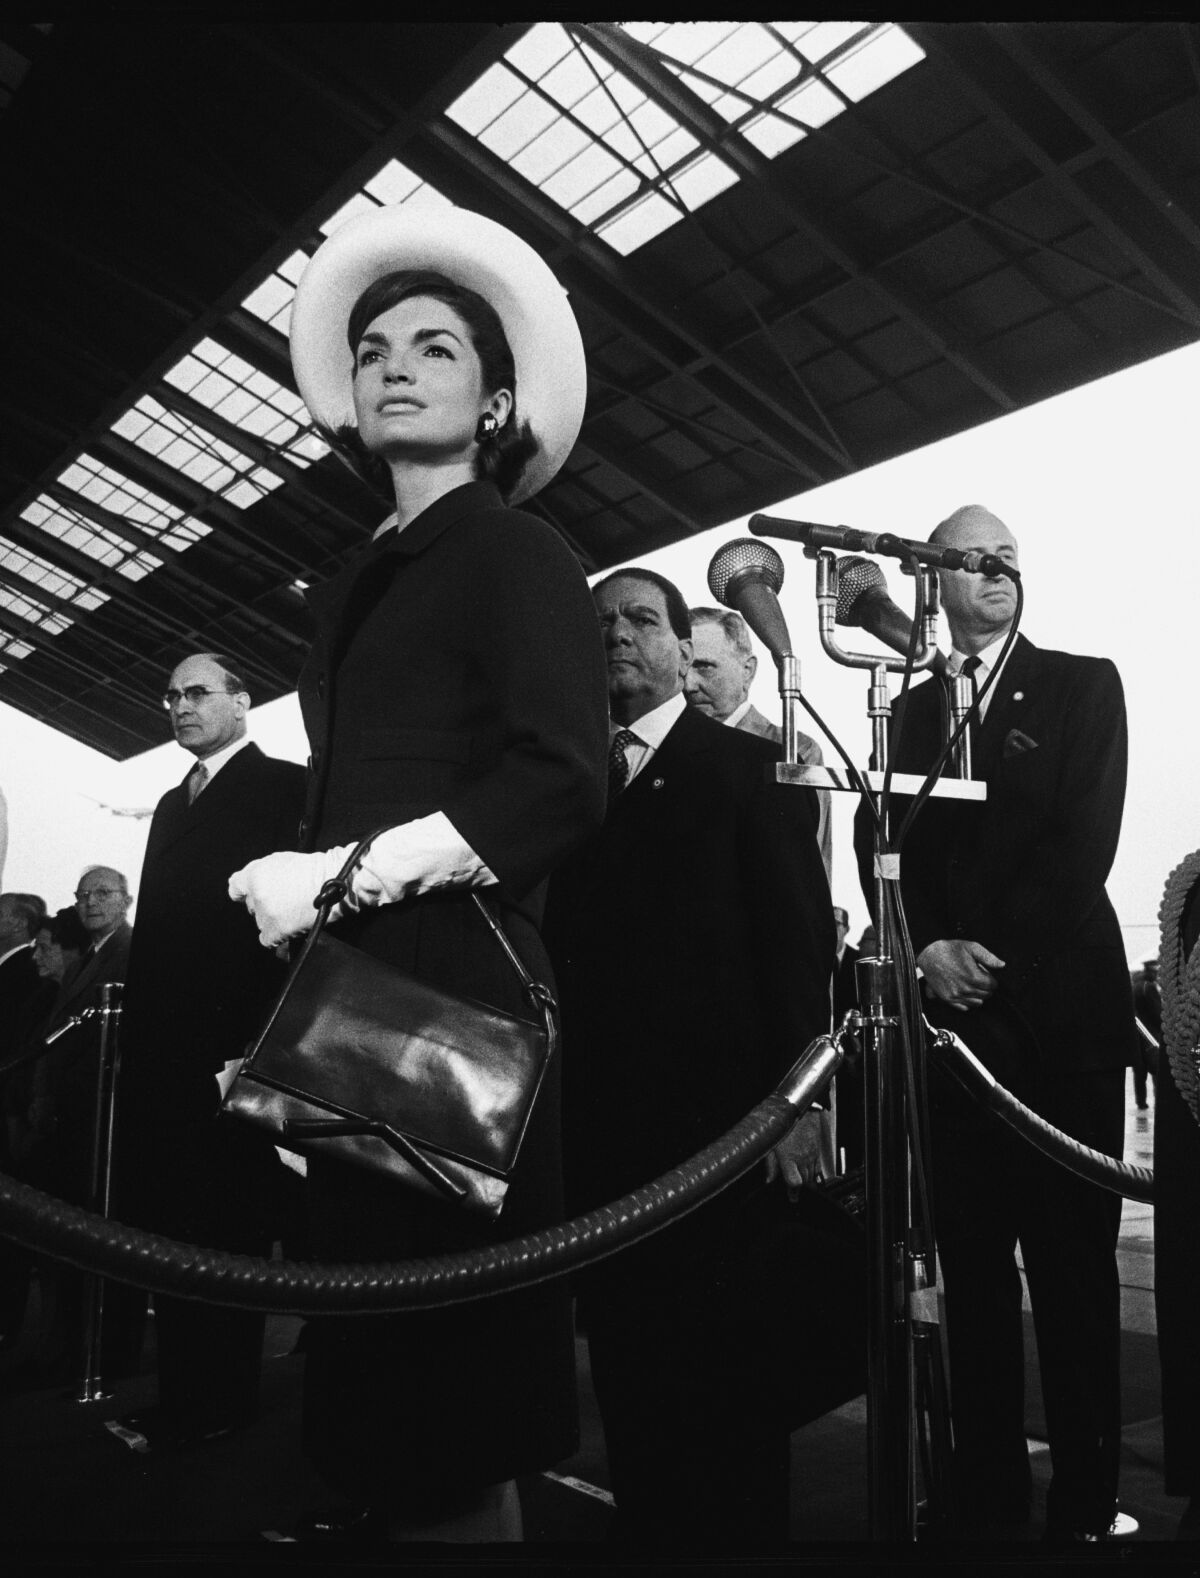 A woman in a white hat and gloves, wearing a dark suit and carrying a dark purse on her wrist.